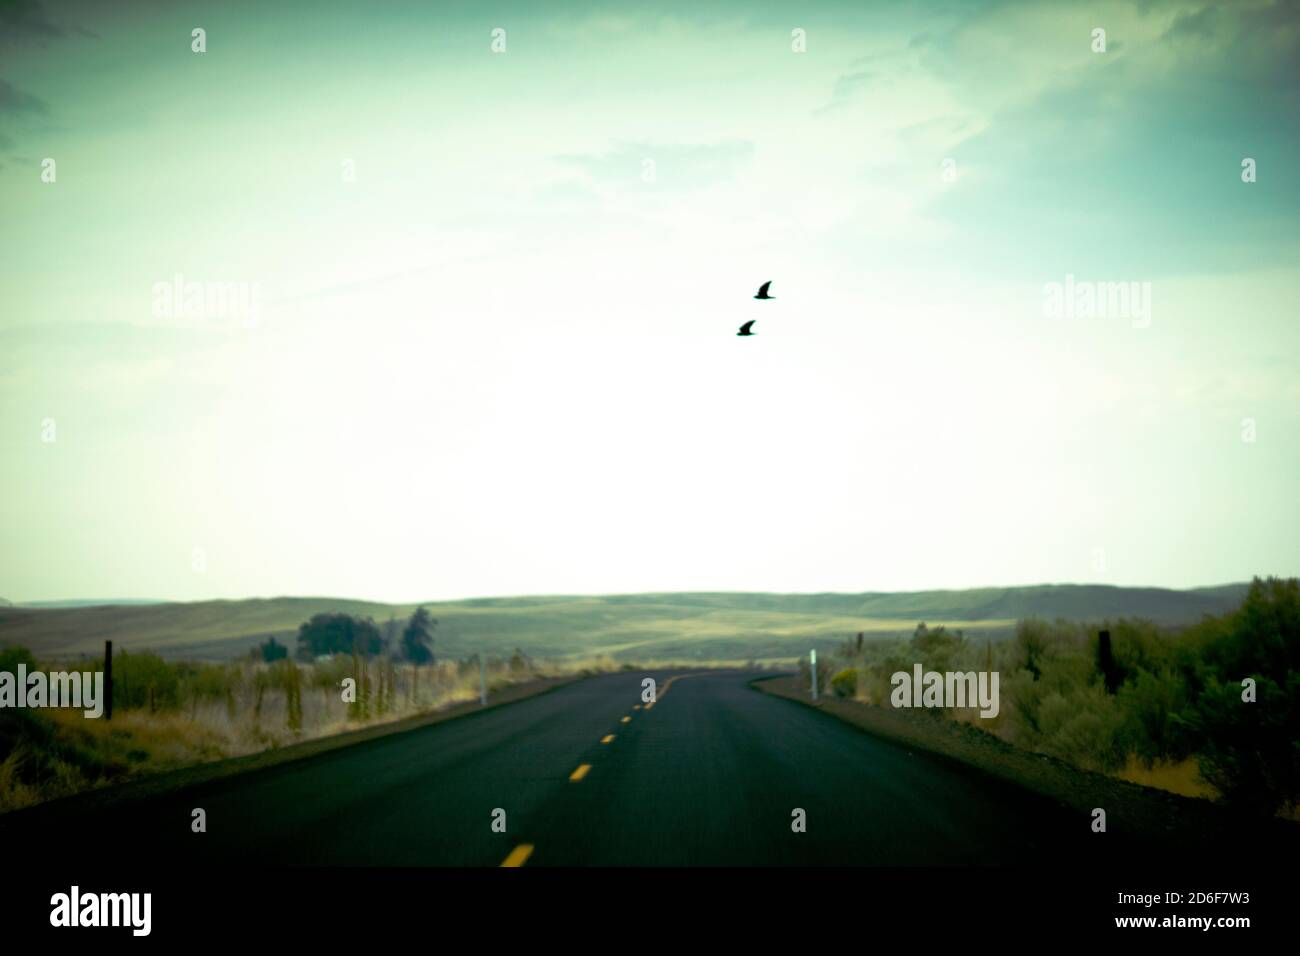 Two Birds flying over Rural Two-Lane Highway Stock Photo